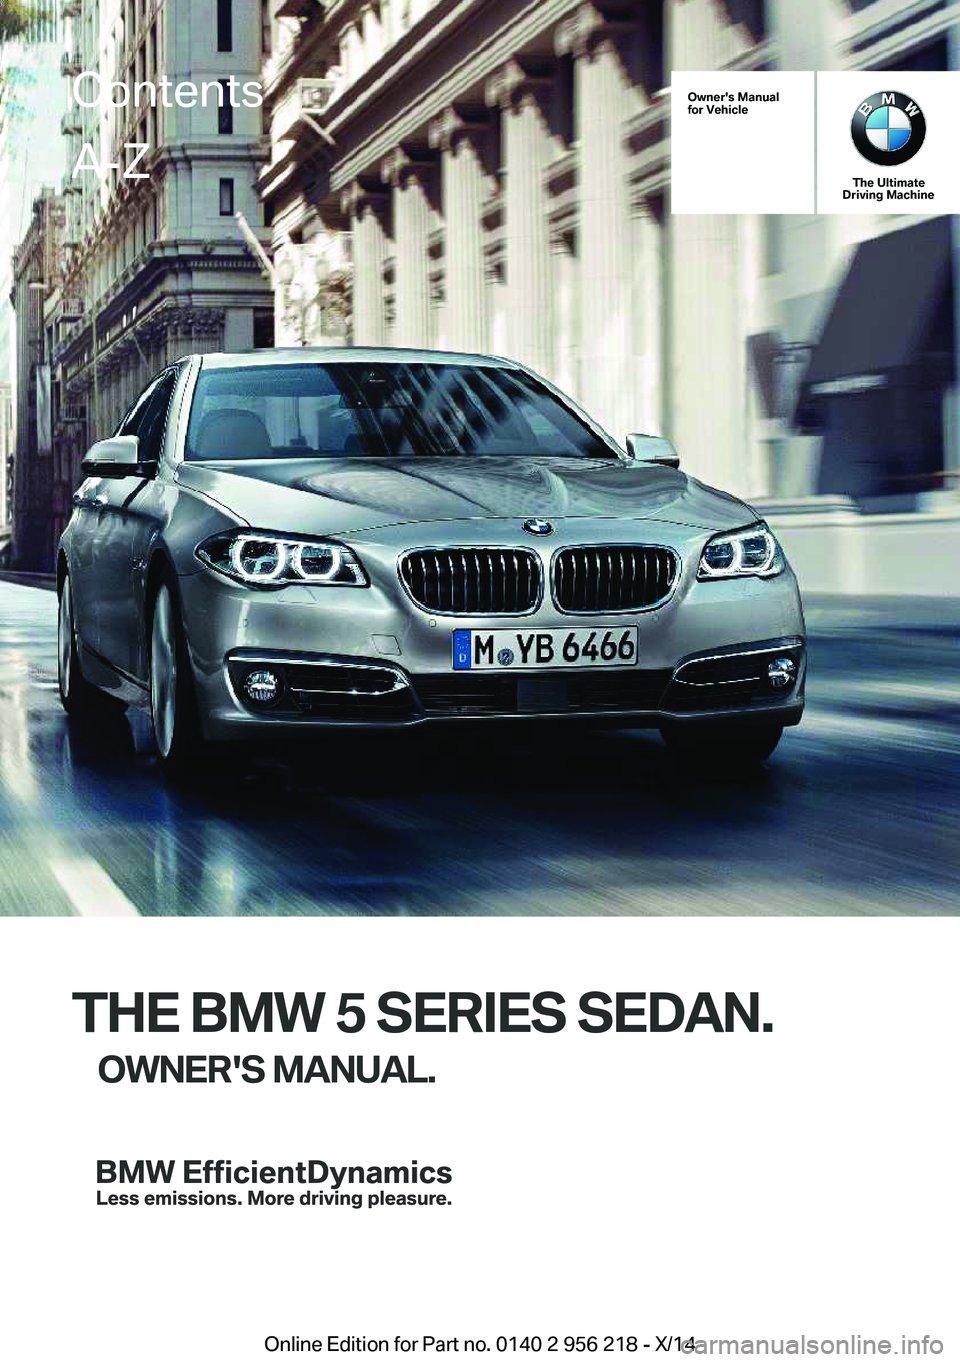 BMW 550I XDRIVE SEDAN 2014  Owners Manual Owner's Manual
for Vehicle
The Ultimate
Driving Machine
THE BMW 5 SERIES SEDAN.
OWNER'S MANUAL.
ContentsA-Z
Online Edition for Part no. 0140 2 956 218 - X/14   